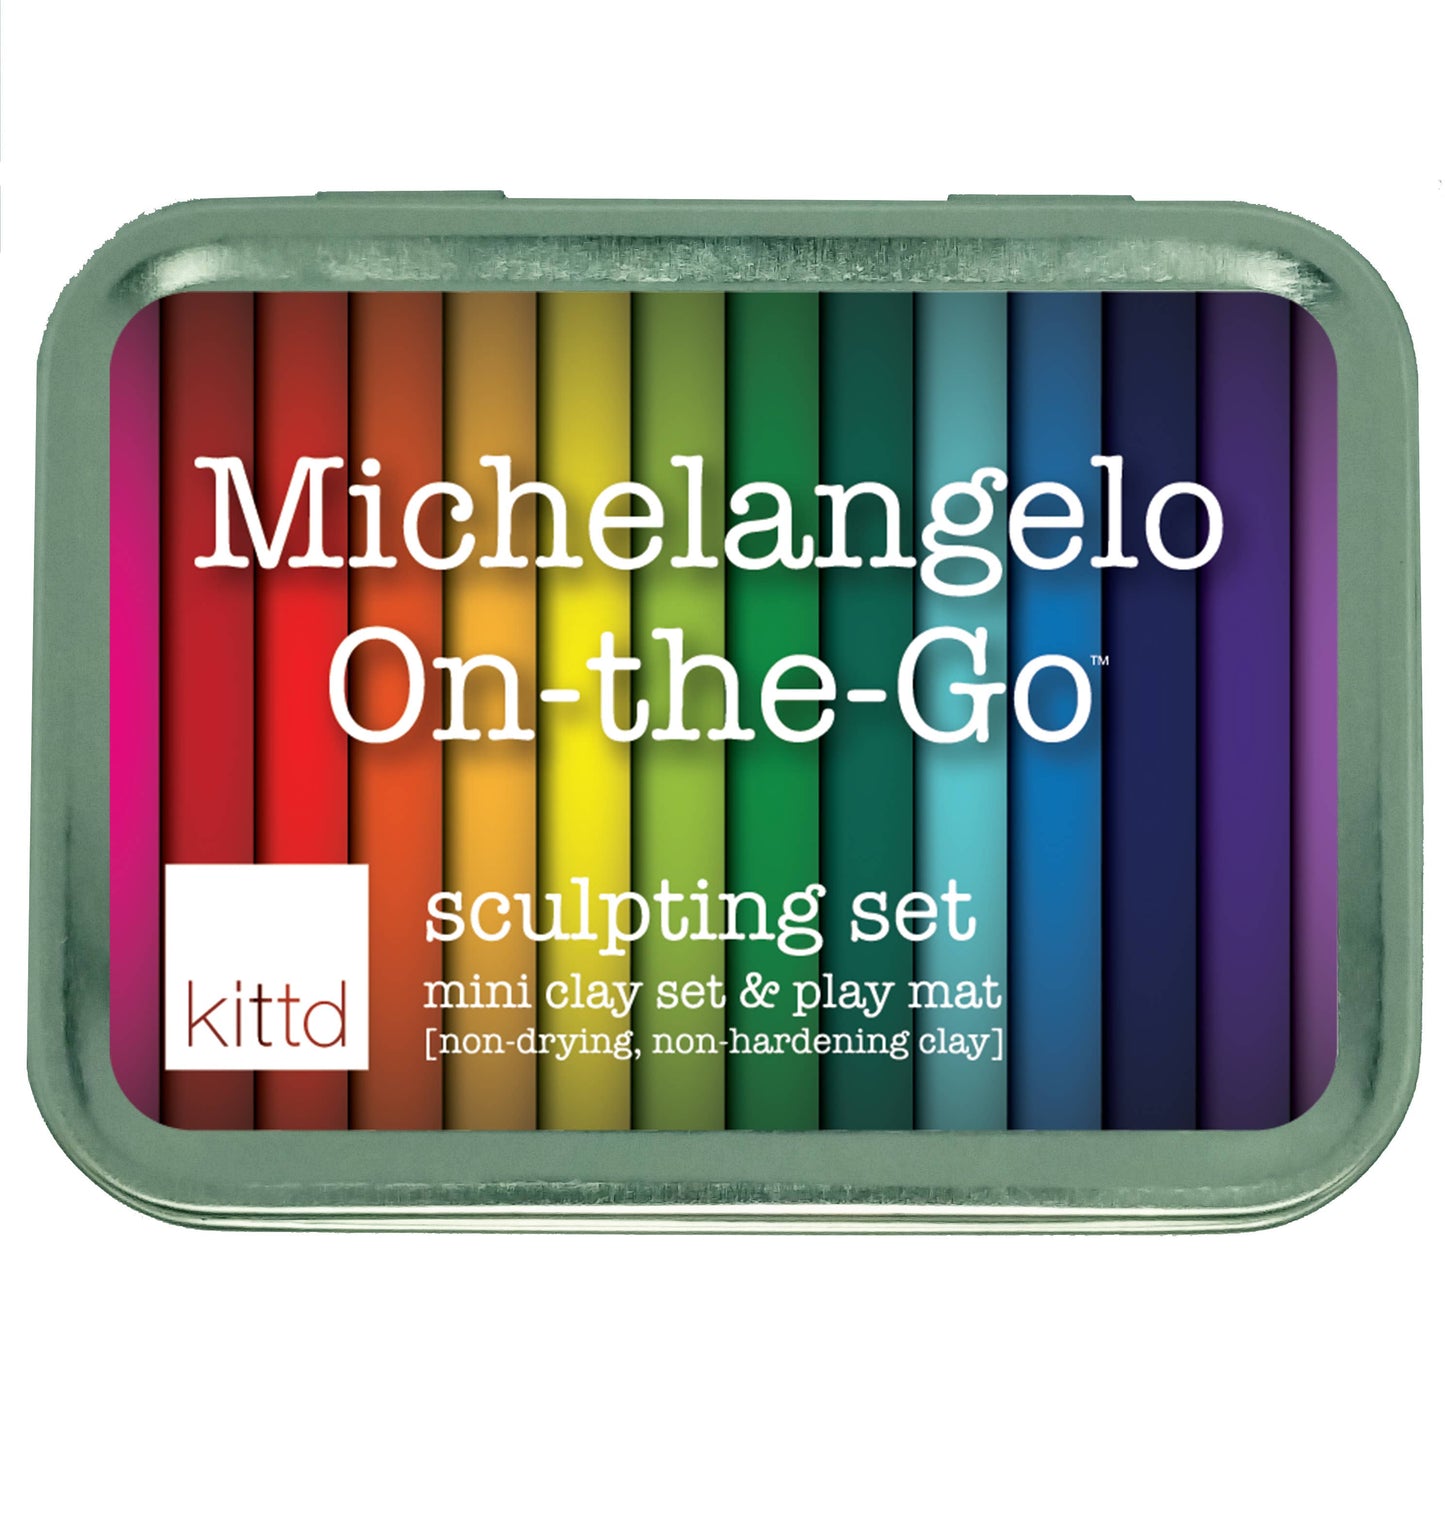 Michelangelo On-the-Go Kids Clay Play Set